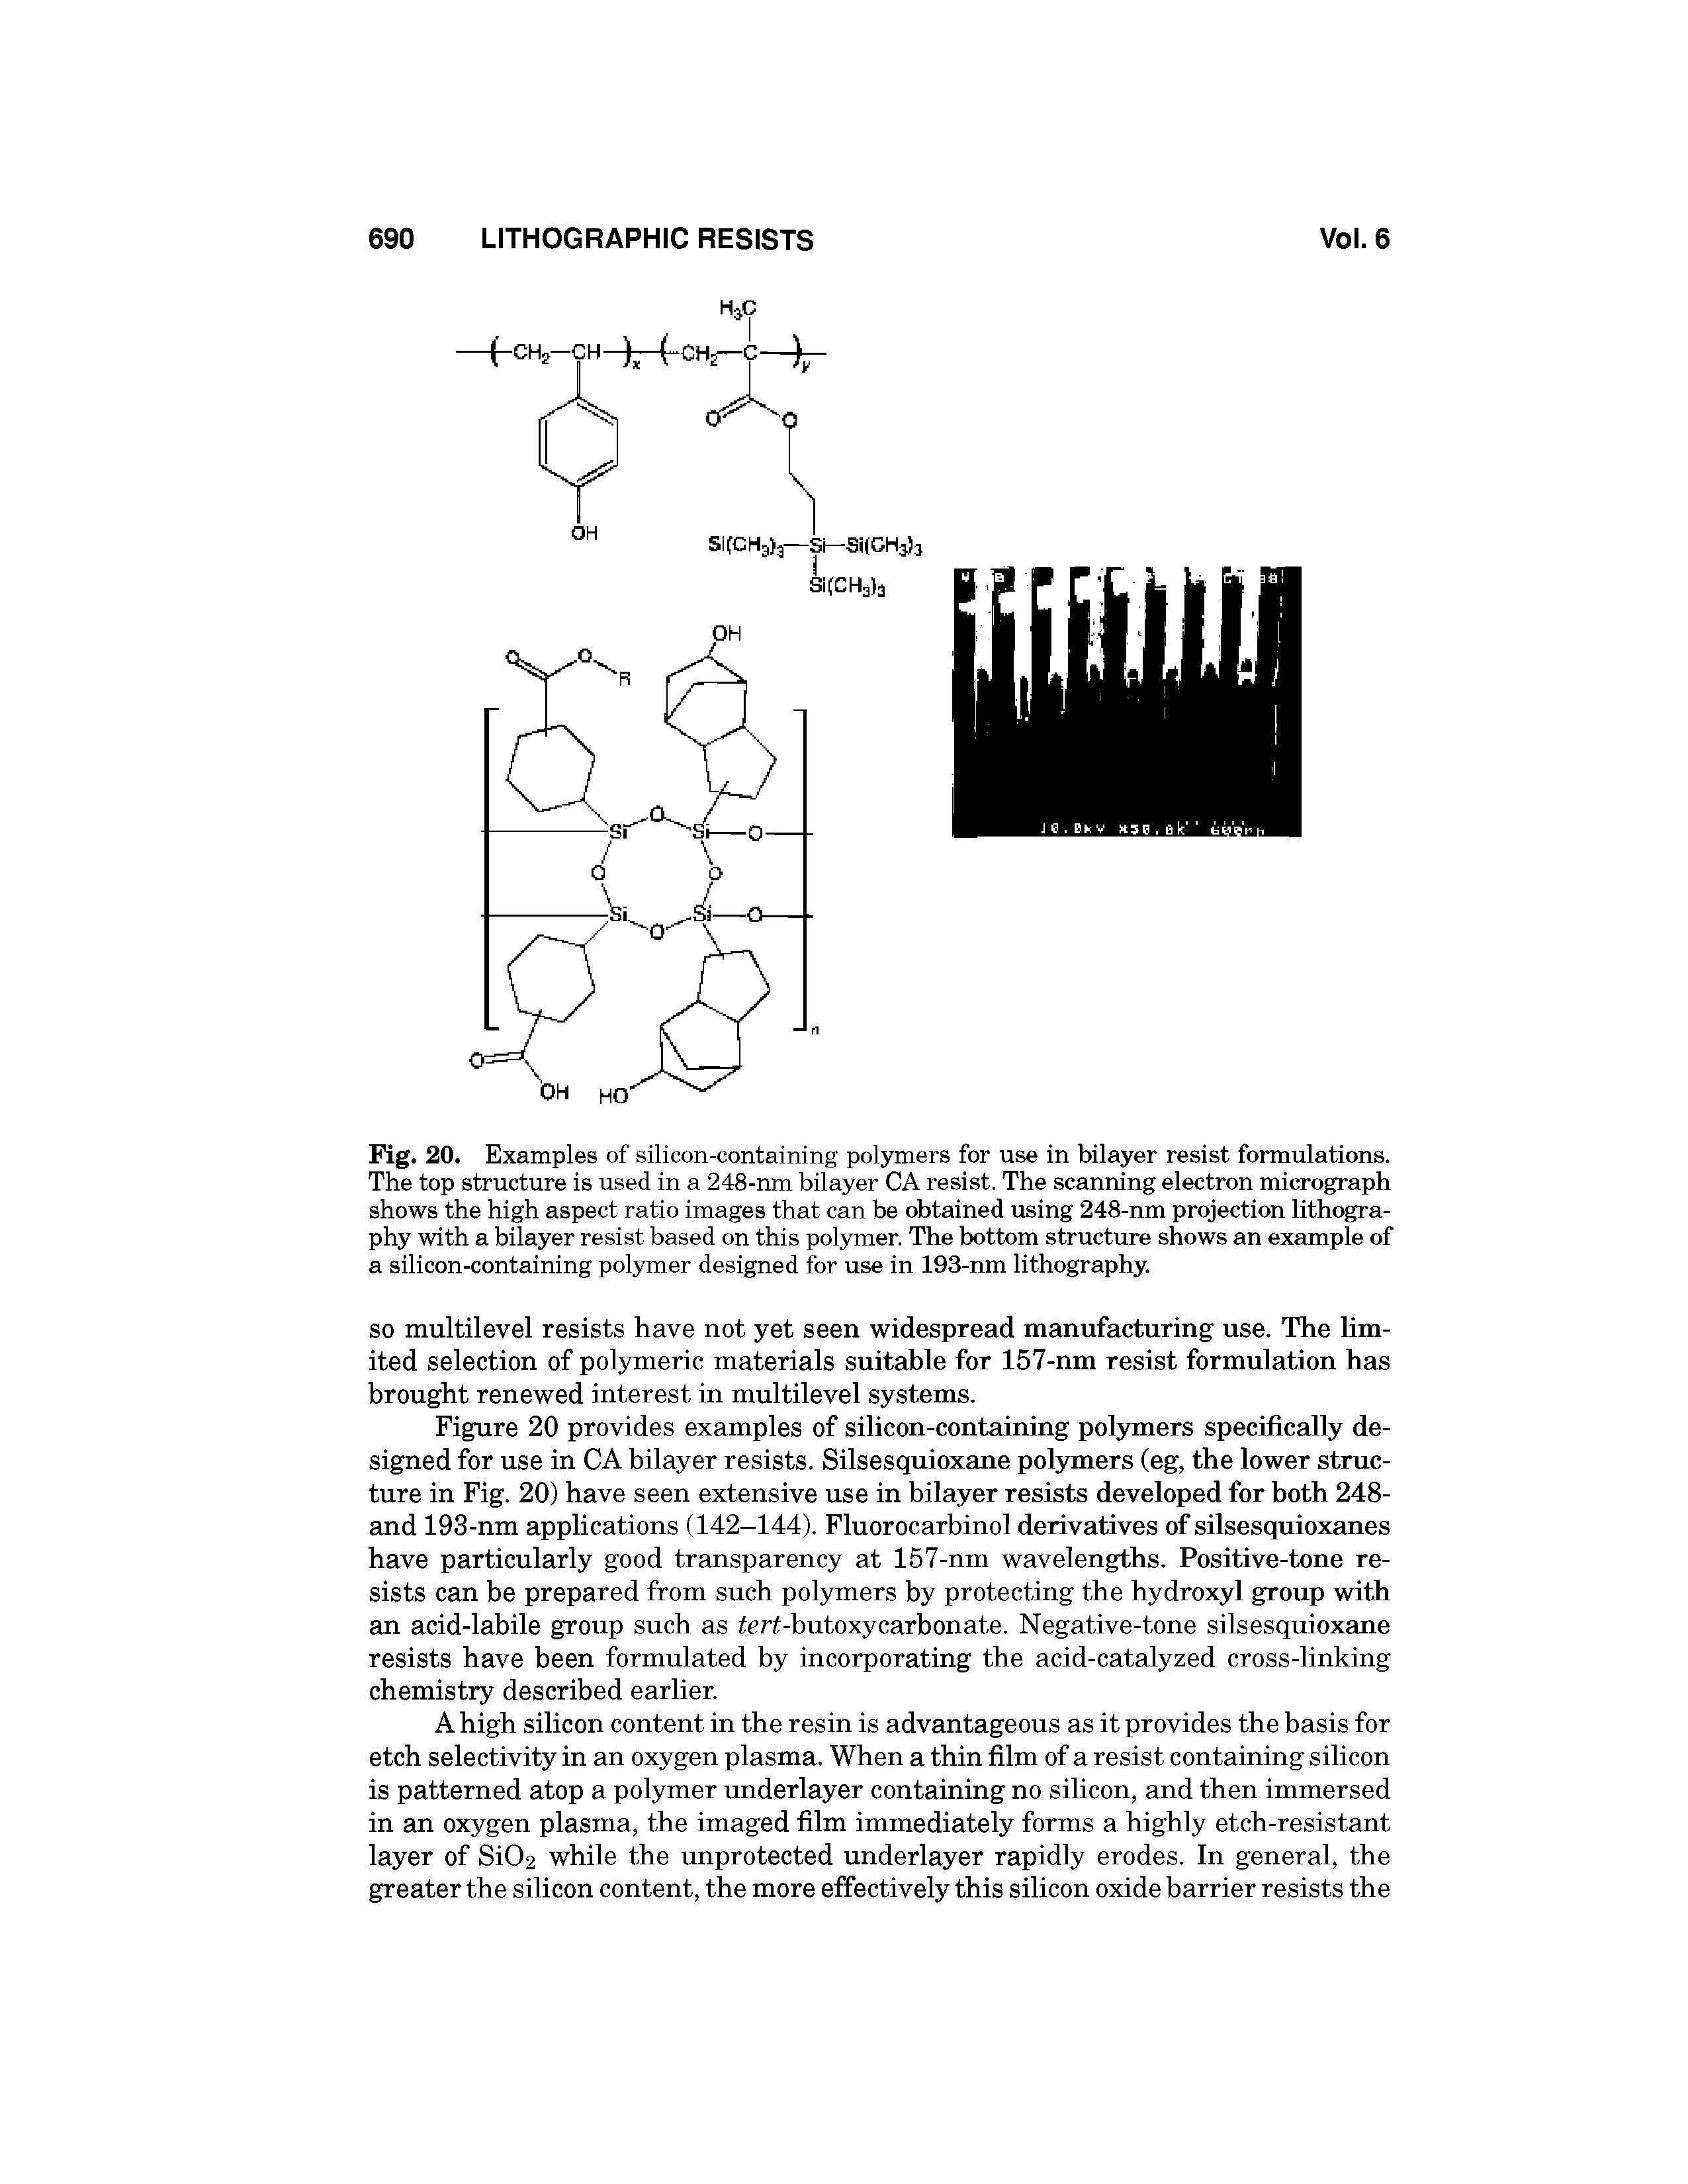 Fig. 20. Examples of silicon-containing polymers for use in bilayer resist formulations. The top structure is used in a 248-rnn bilayer CA resist. The scanning electron micrograph shows the high aspect ratio images that can be obtained using 248-mn projection lithc a-phy with a bilayer resist based on this polymer. The bottom structure shows an example of a silicon-containing polymer designed for use in 193-nm lithography.